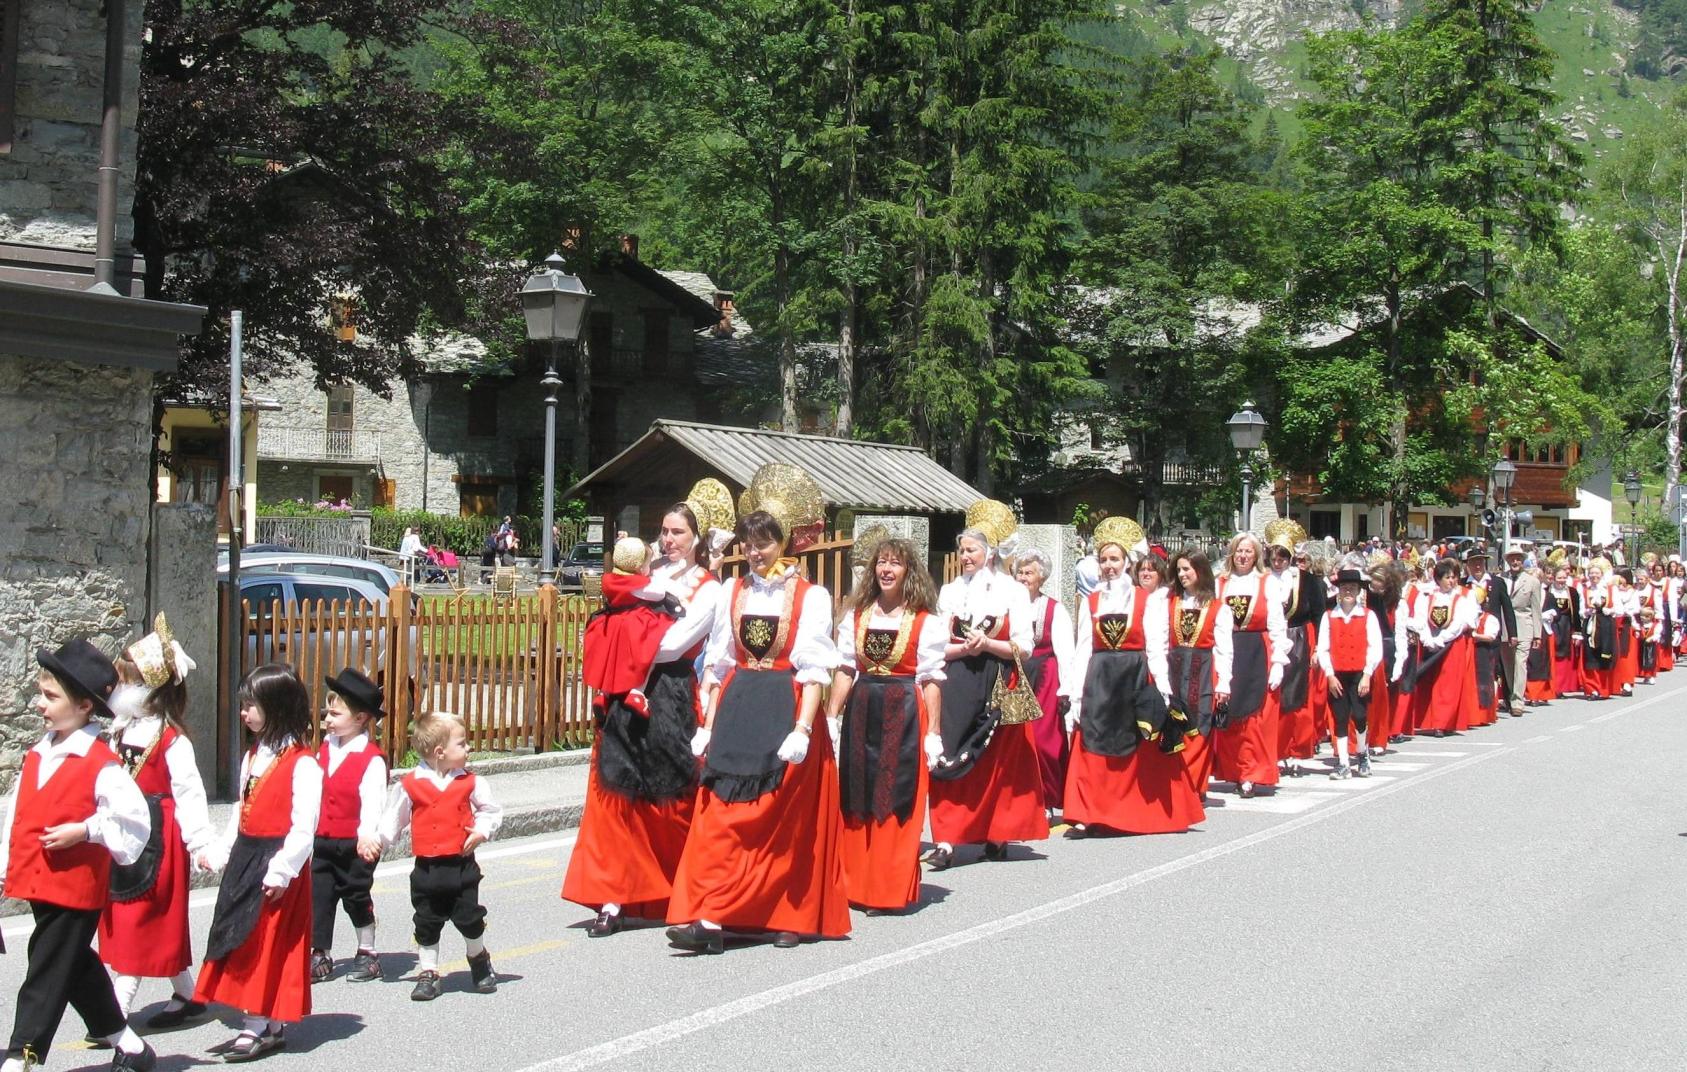 The traditional dress of Gressoney